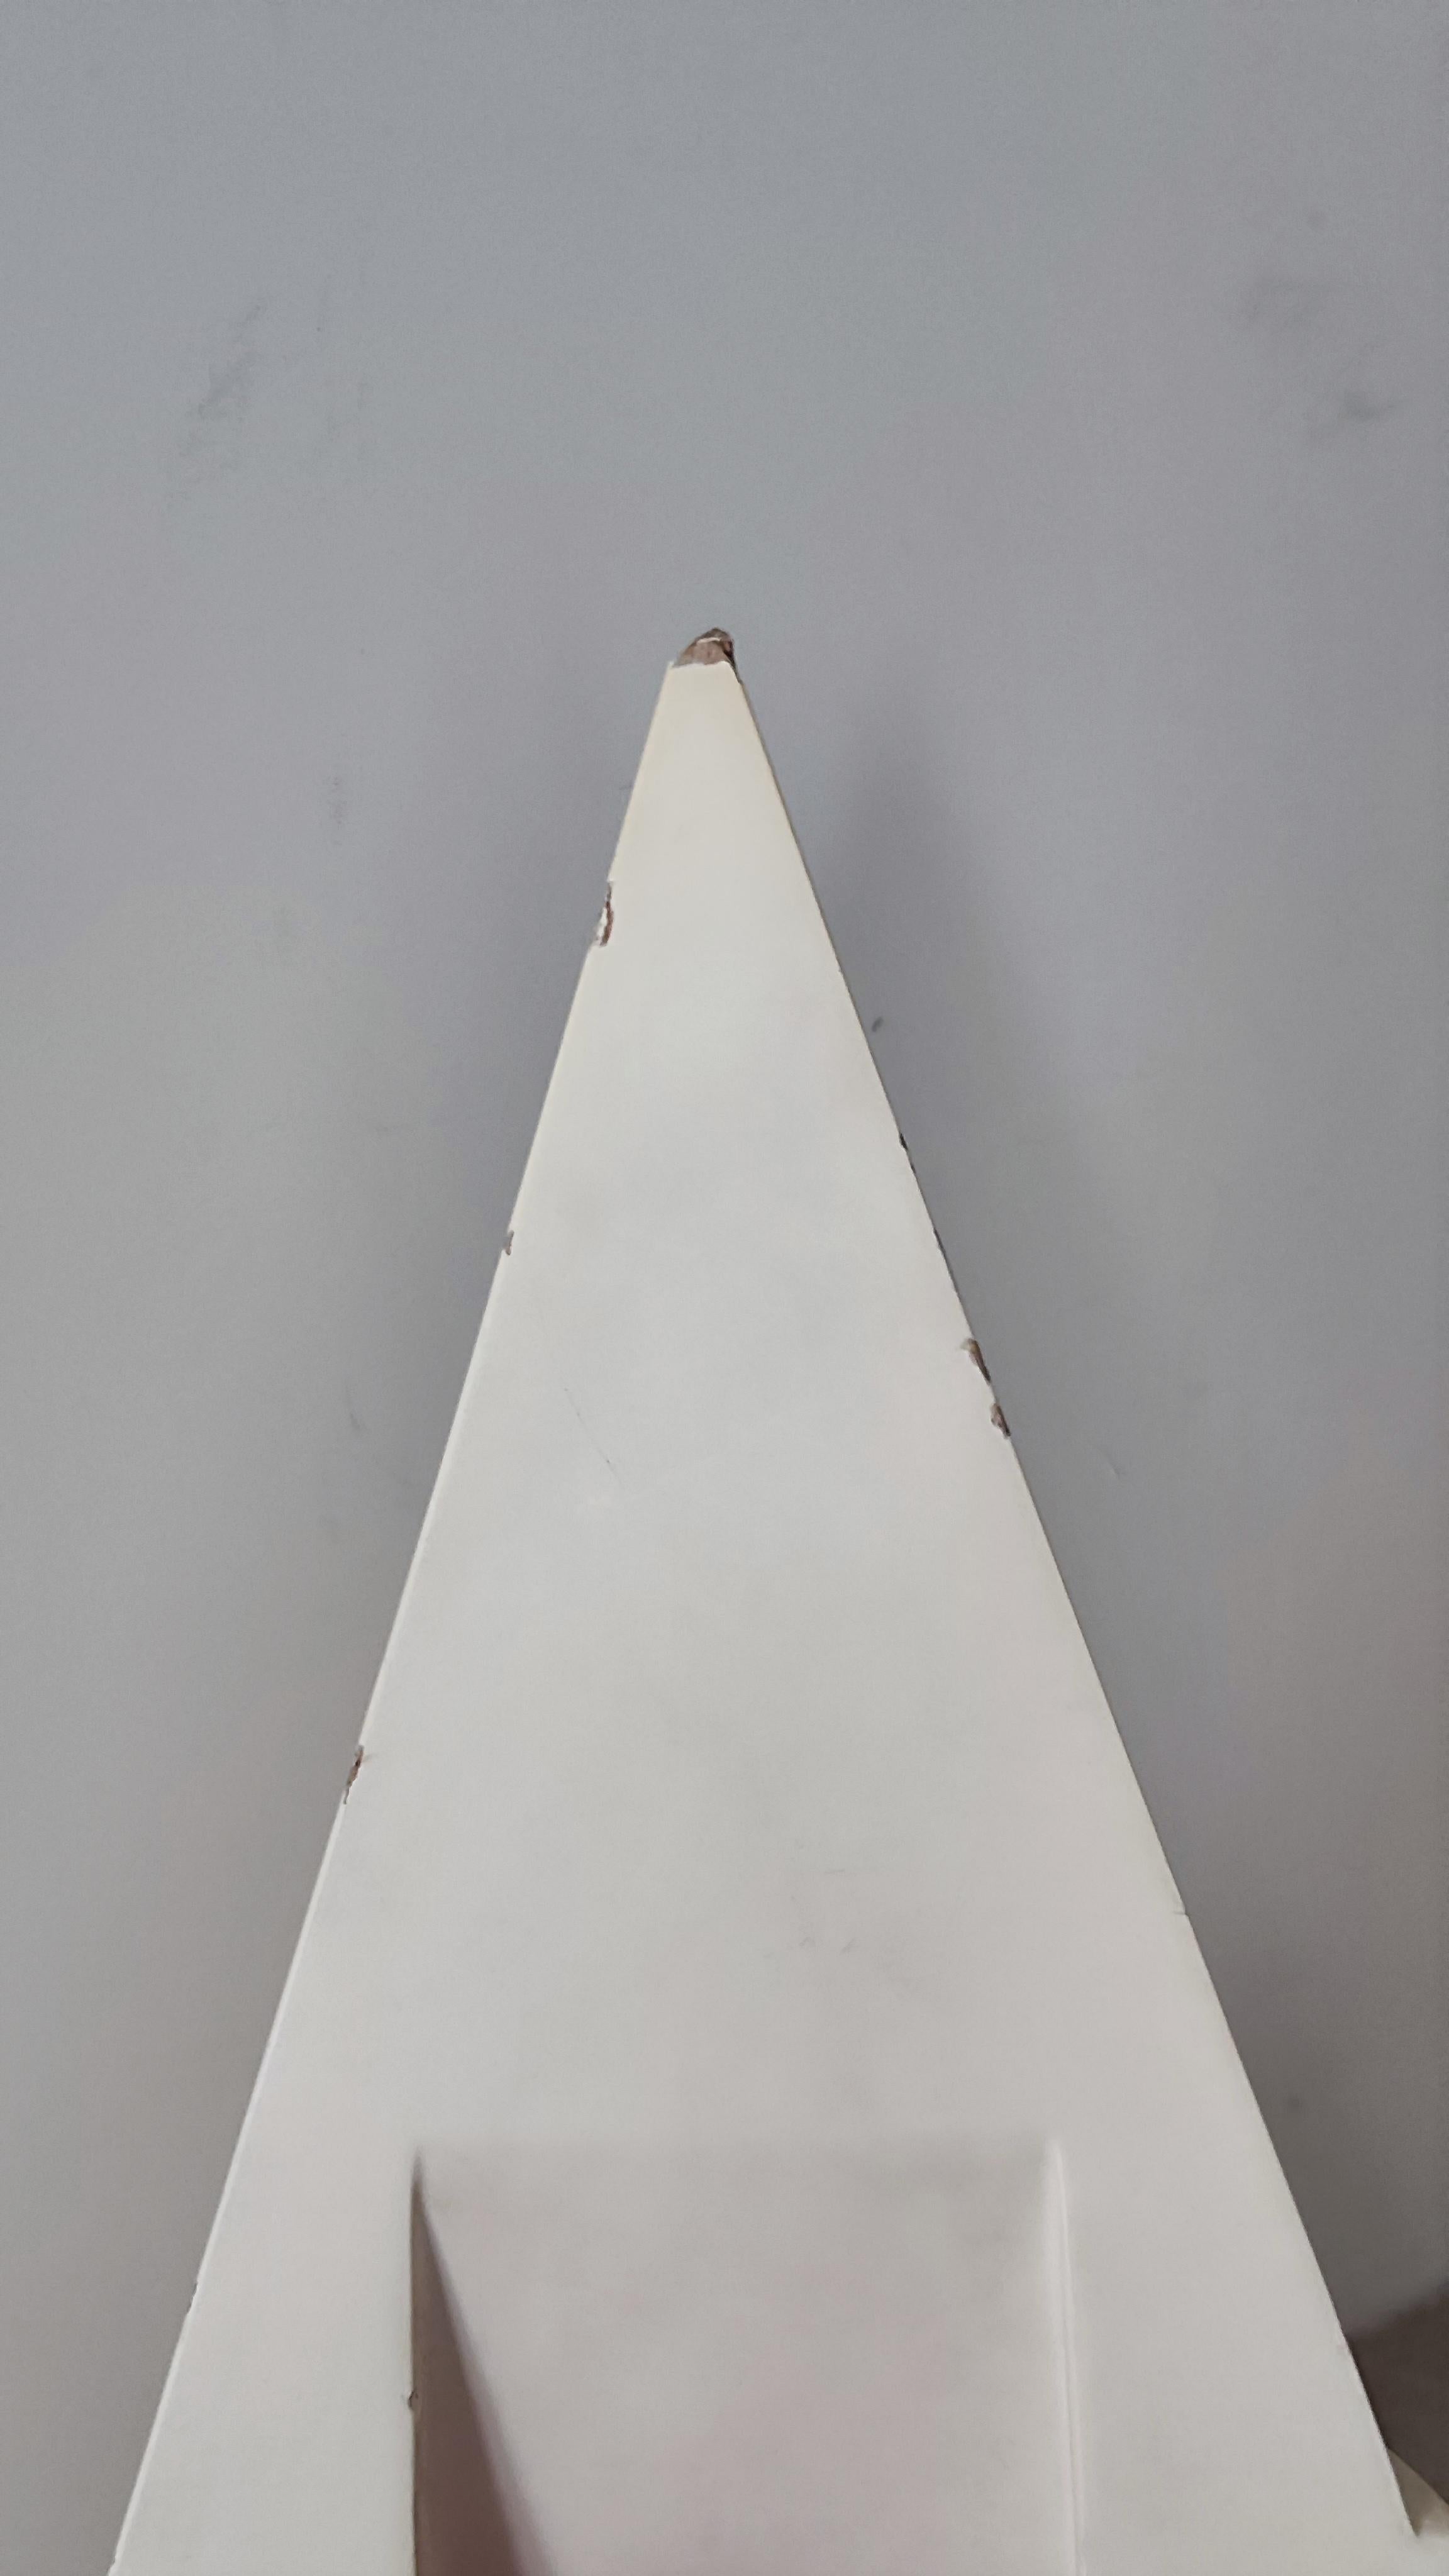 Abstract post modern polychrome pyramid sculpture Memphis 1980, wood - Signed  For Sale 9